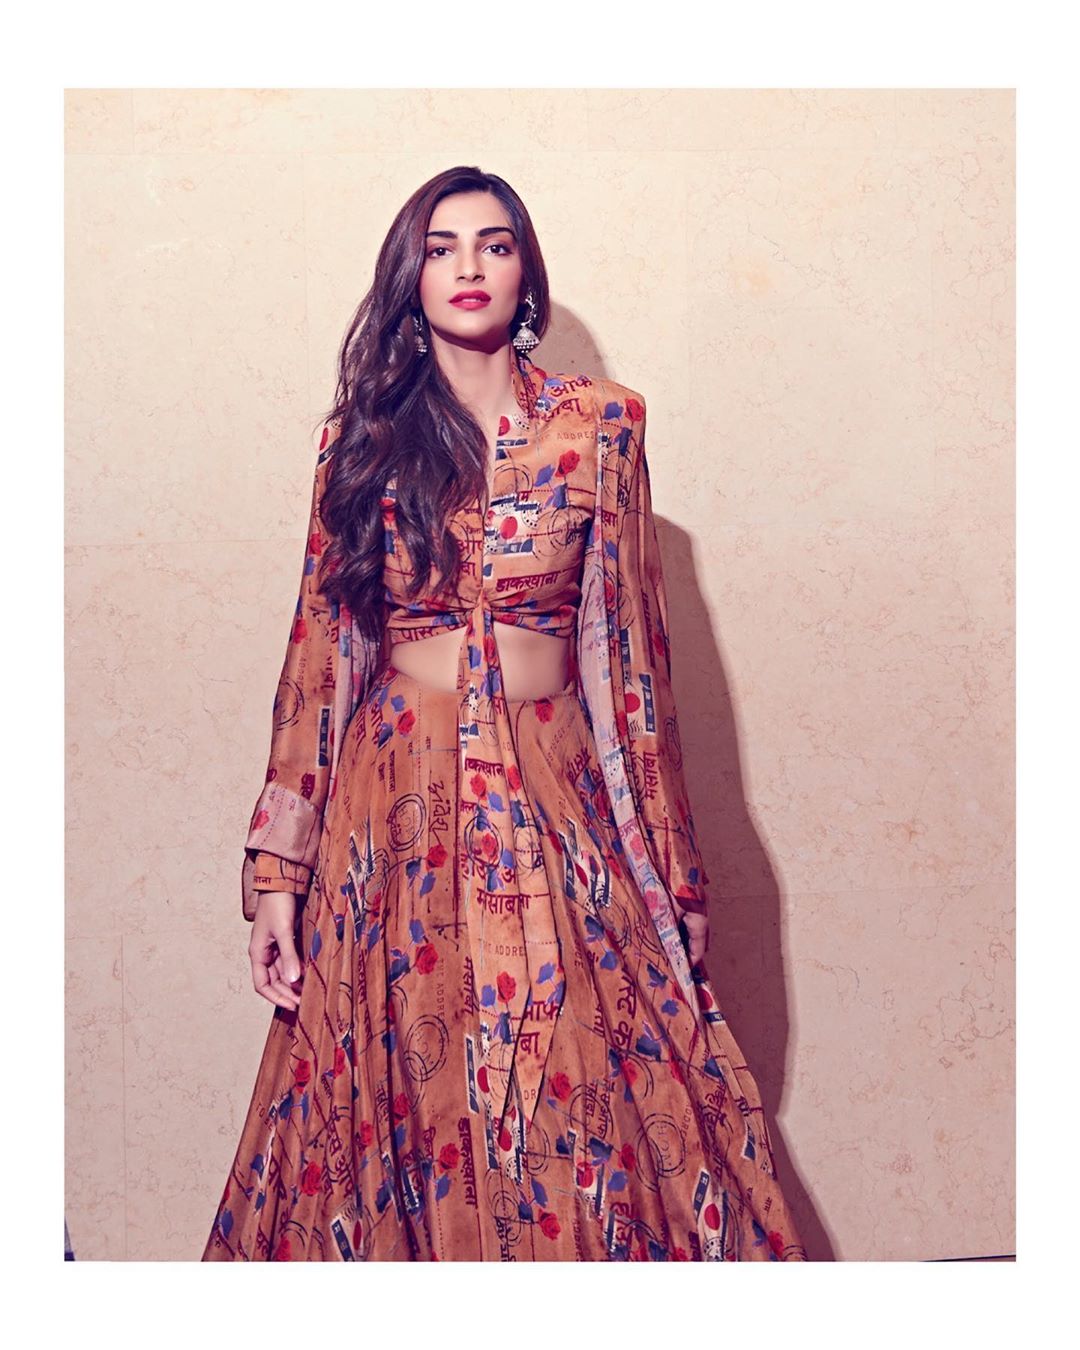 Sonam Kapoor In The Lost Letters Printed Lehenga from the Masaba x Rhea C Wallpaper